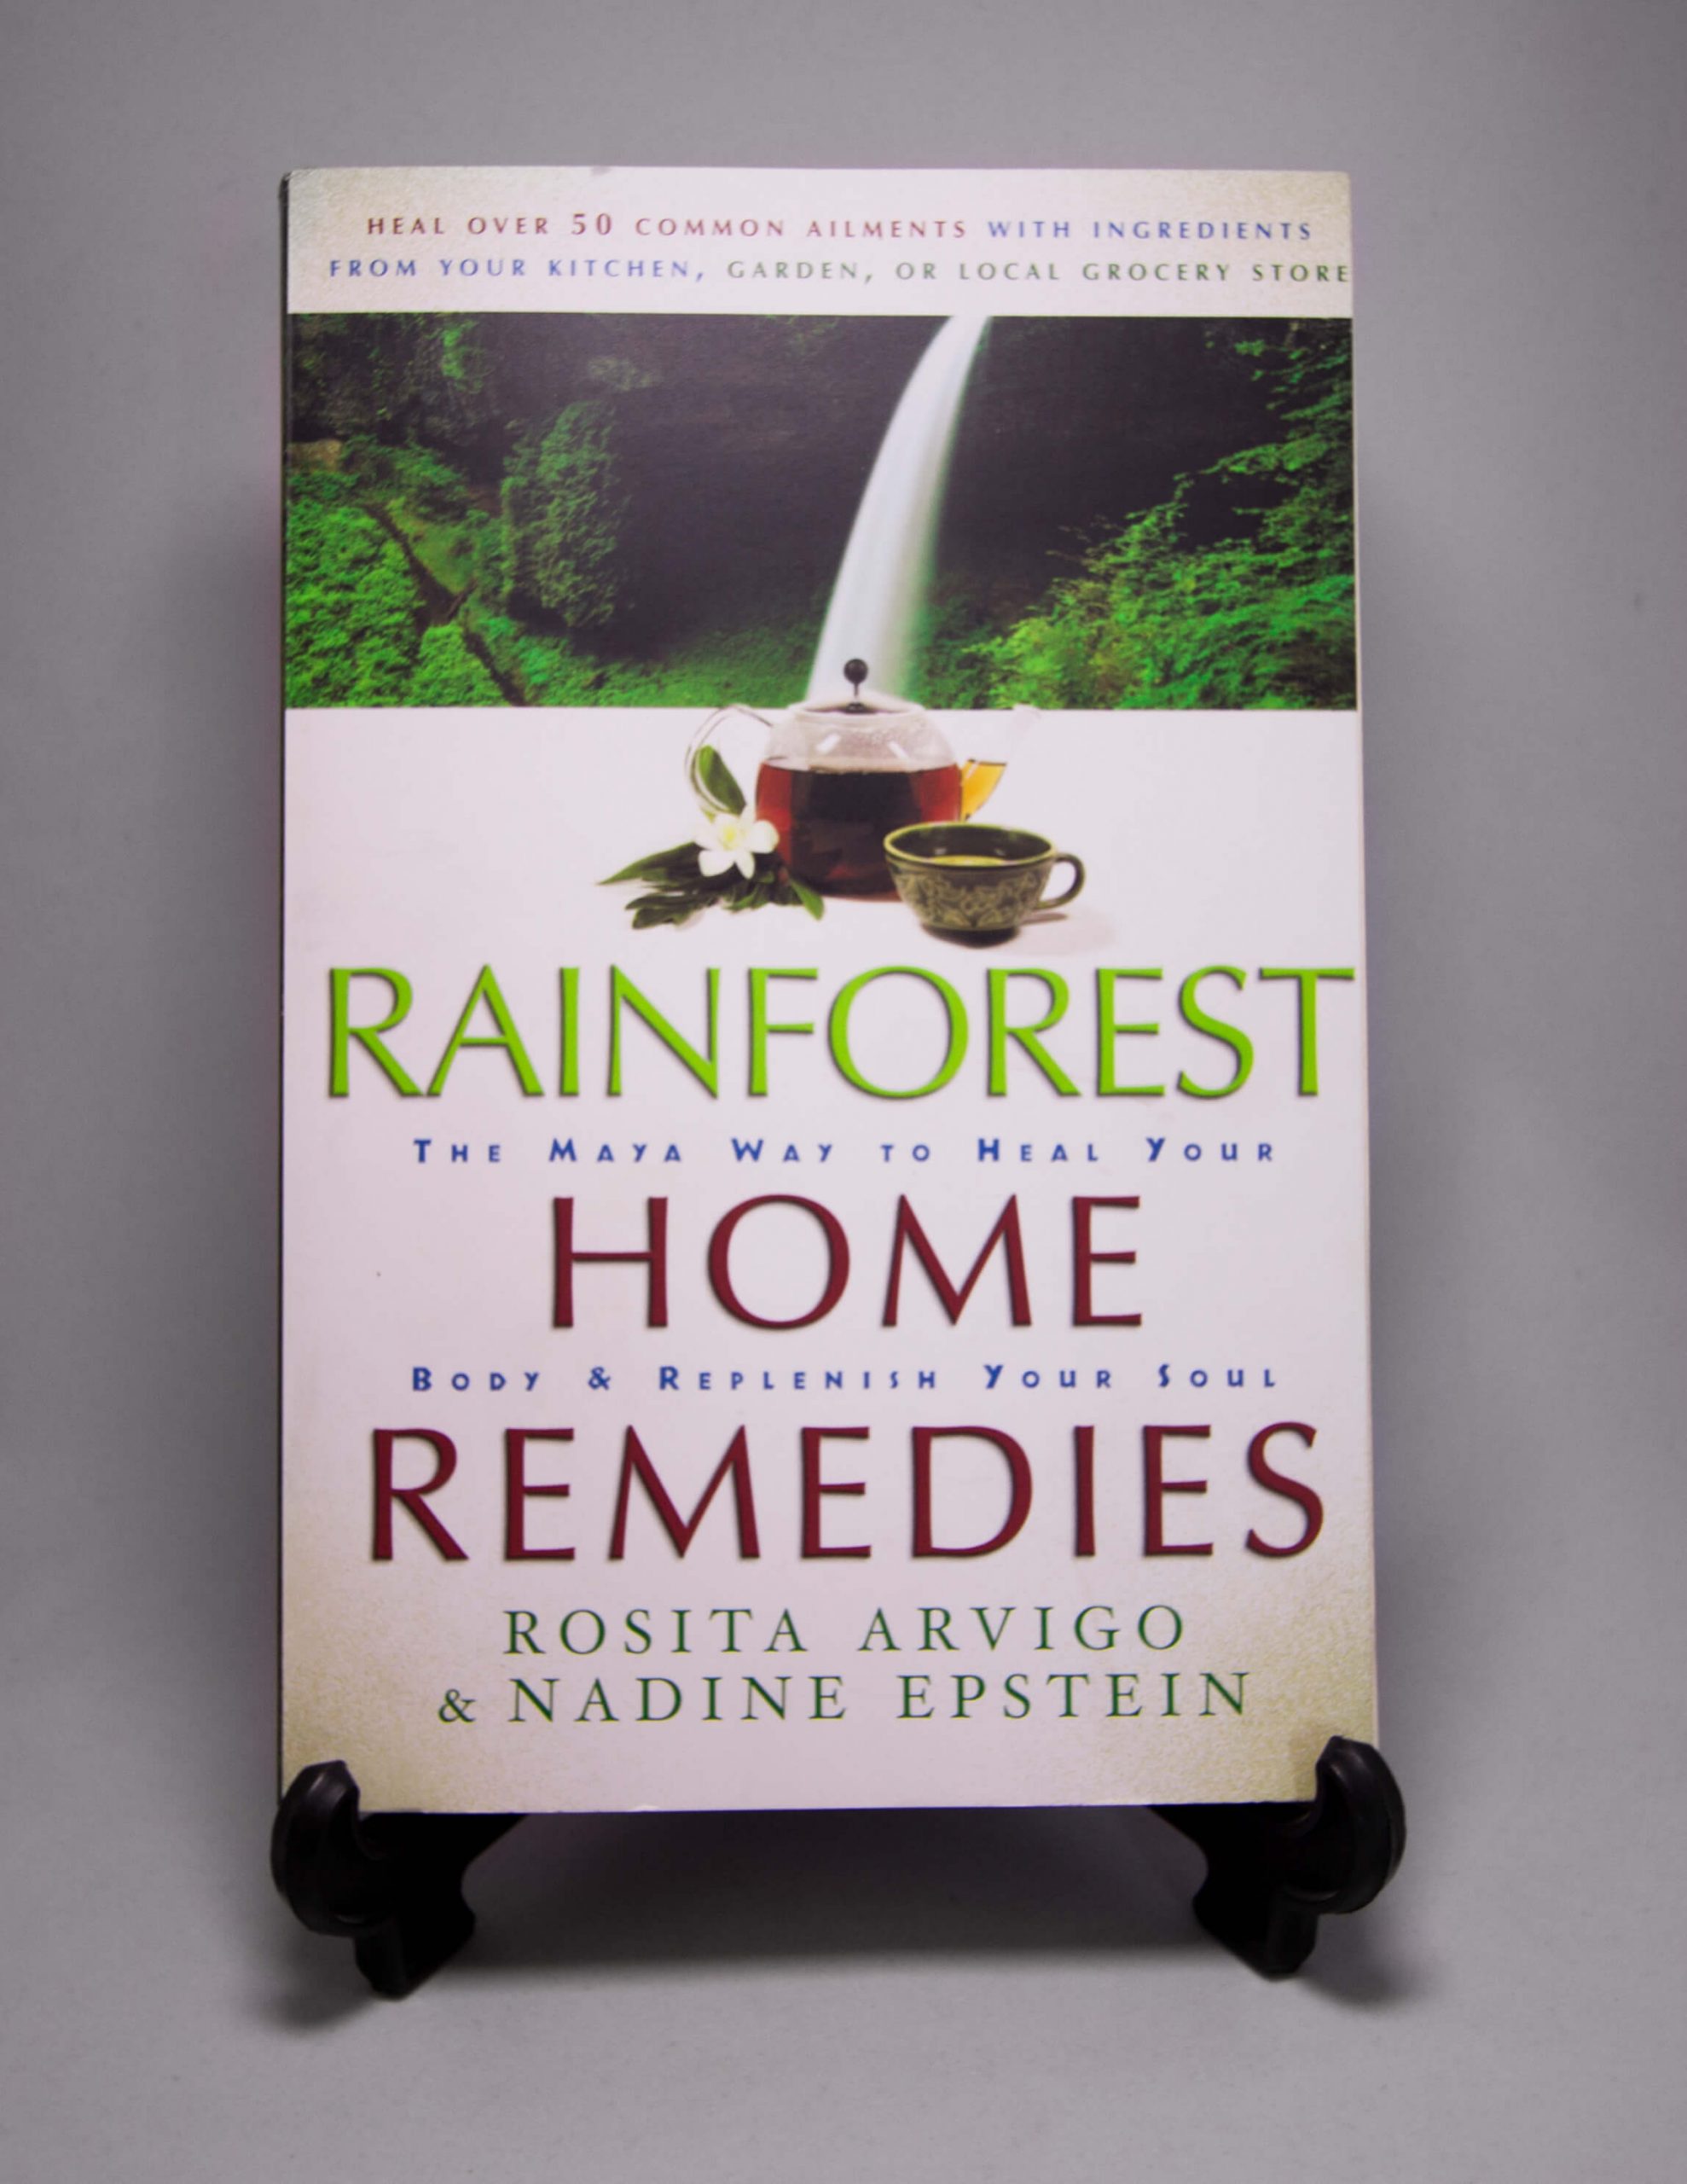 Rainforest Healing, Spices, Alternatives, Medicines, Soothe, Anti-itch, Cleansing, Remedy